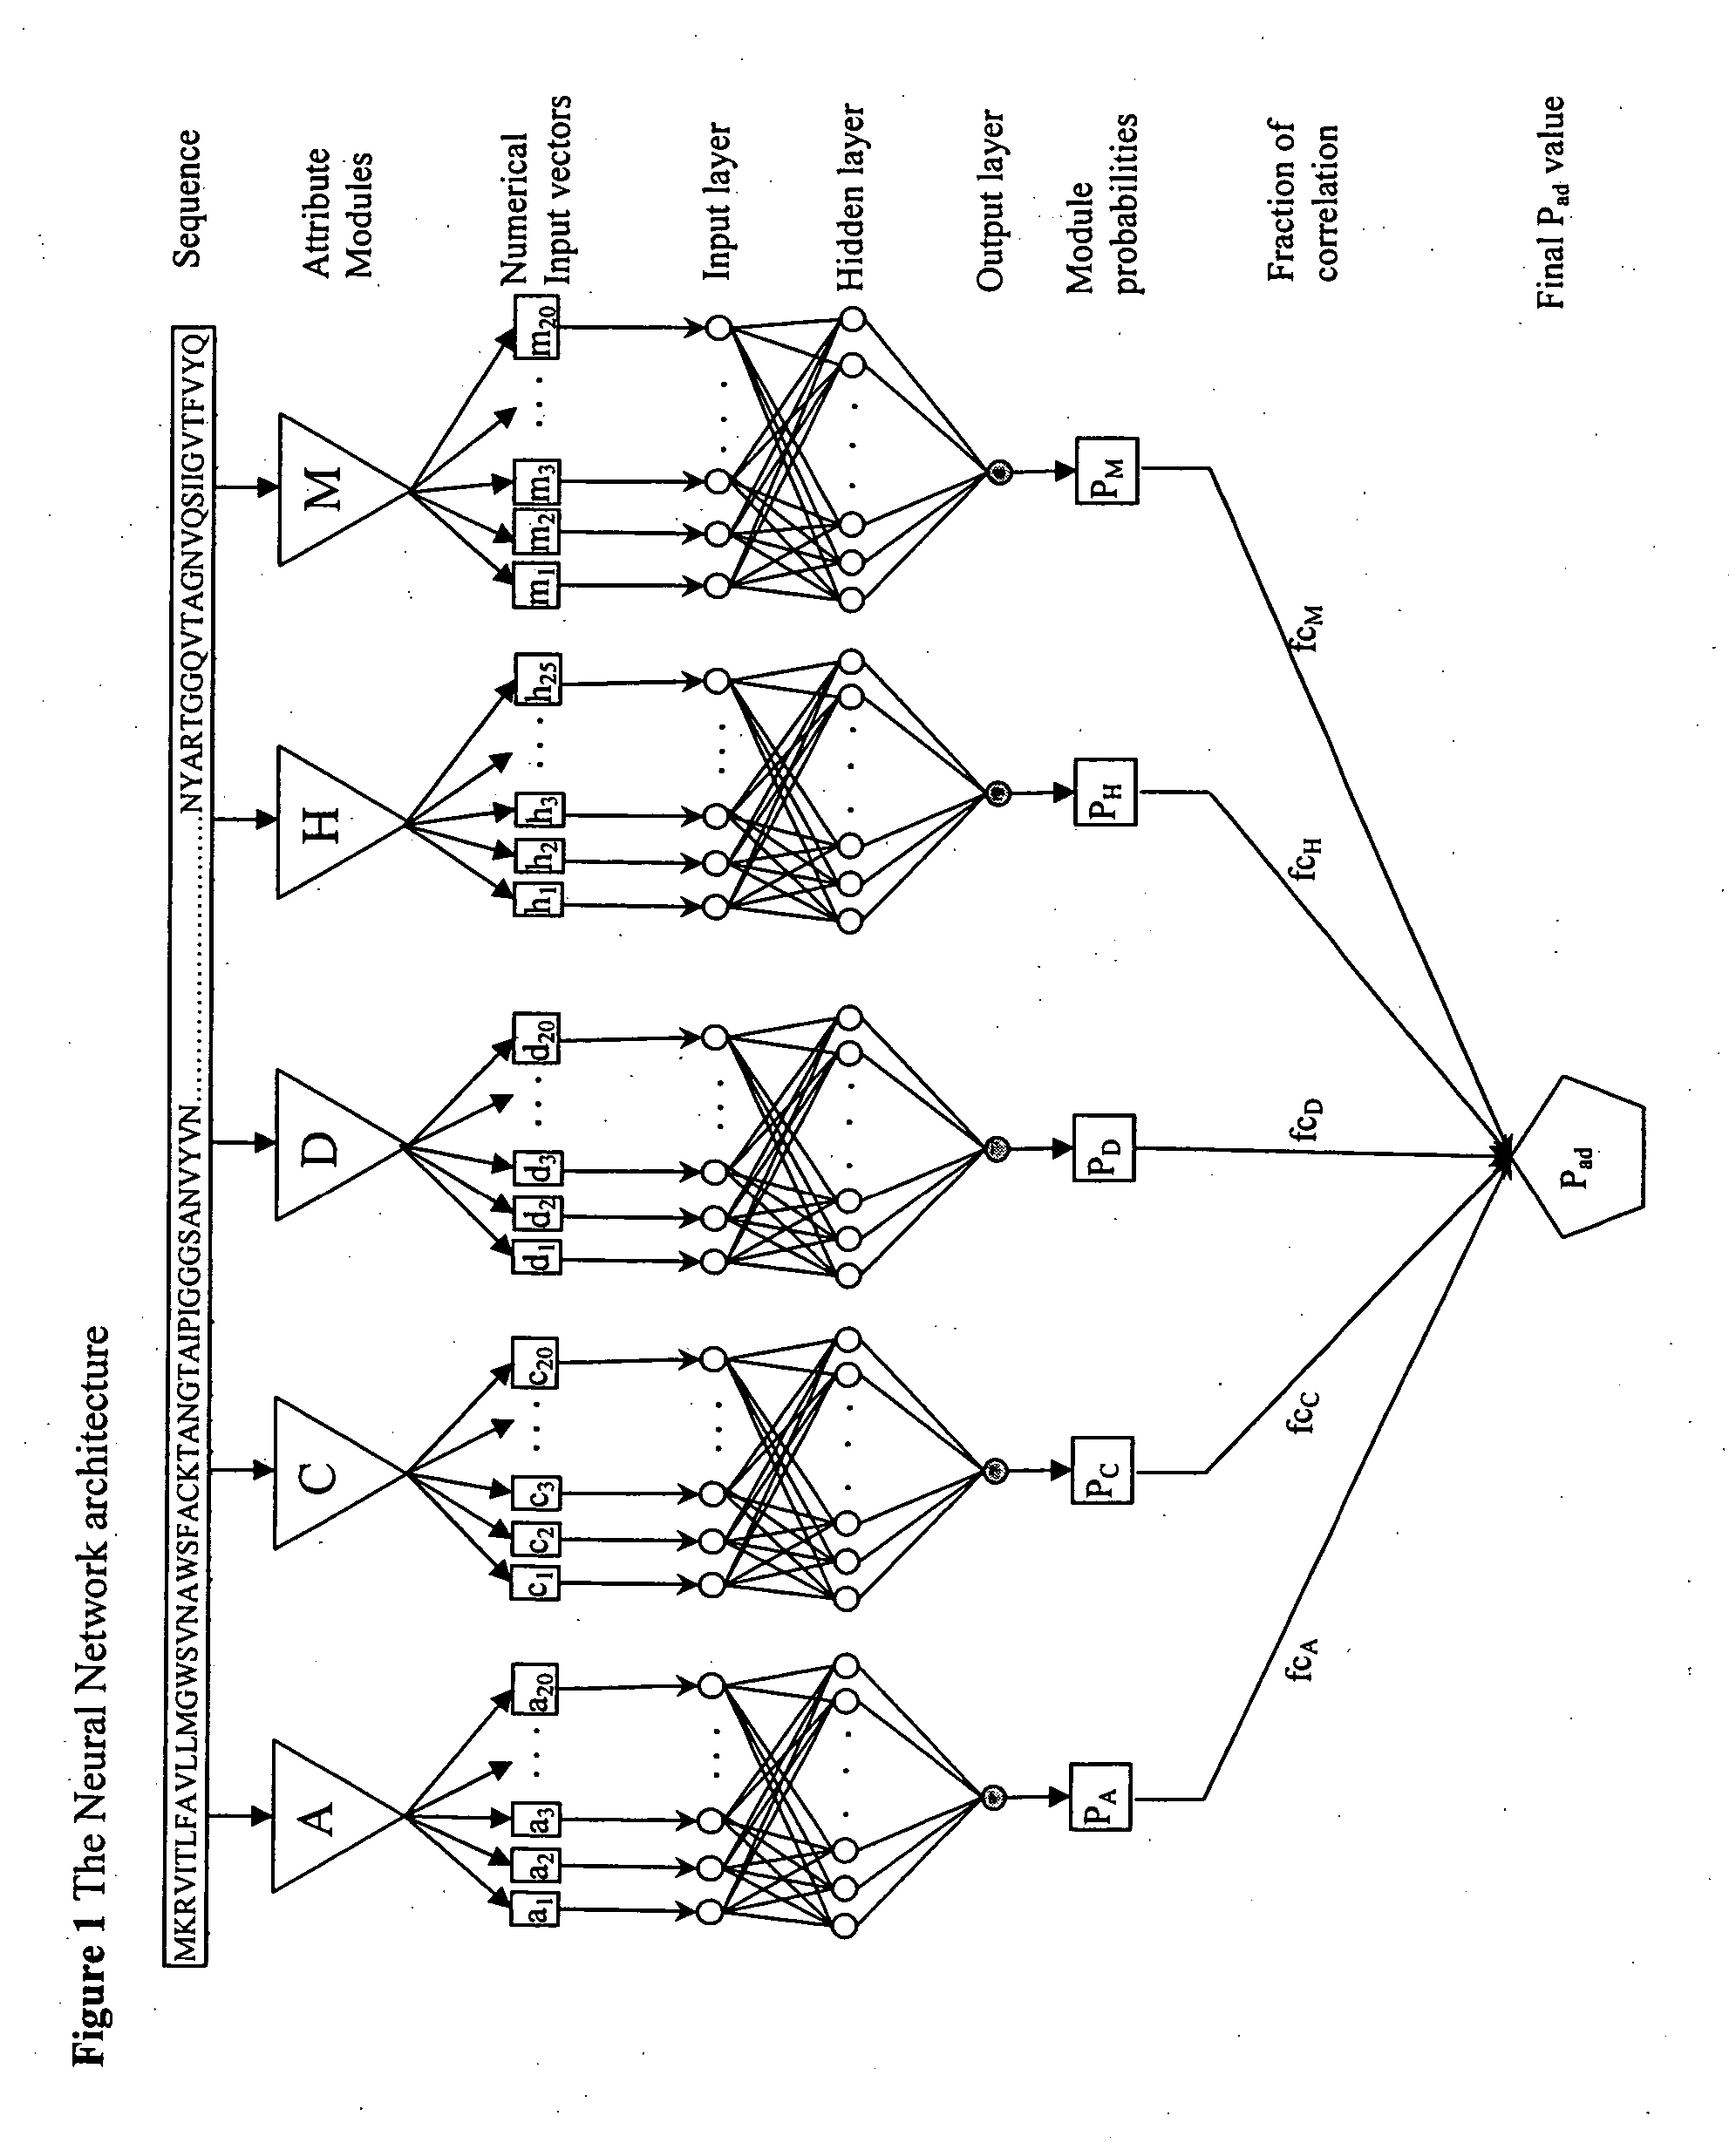 Computational method for identifying adhesin and adhesin-like proteins of therapeutic potential